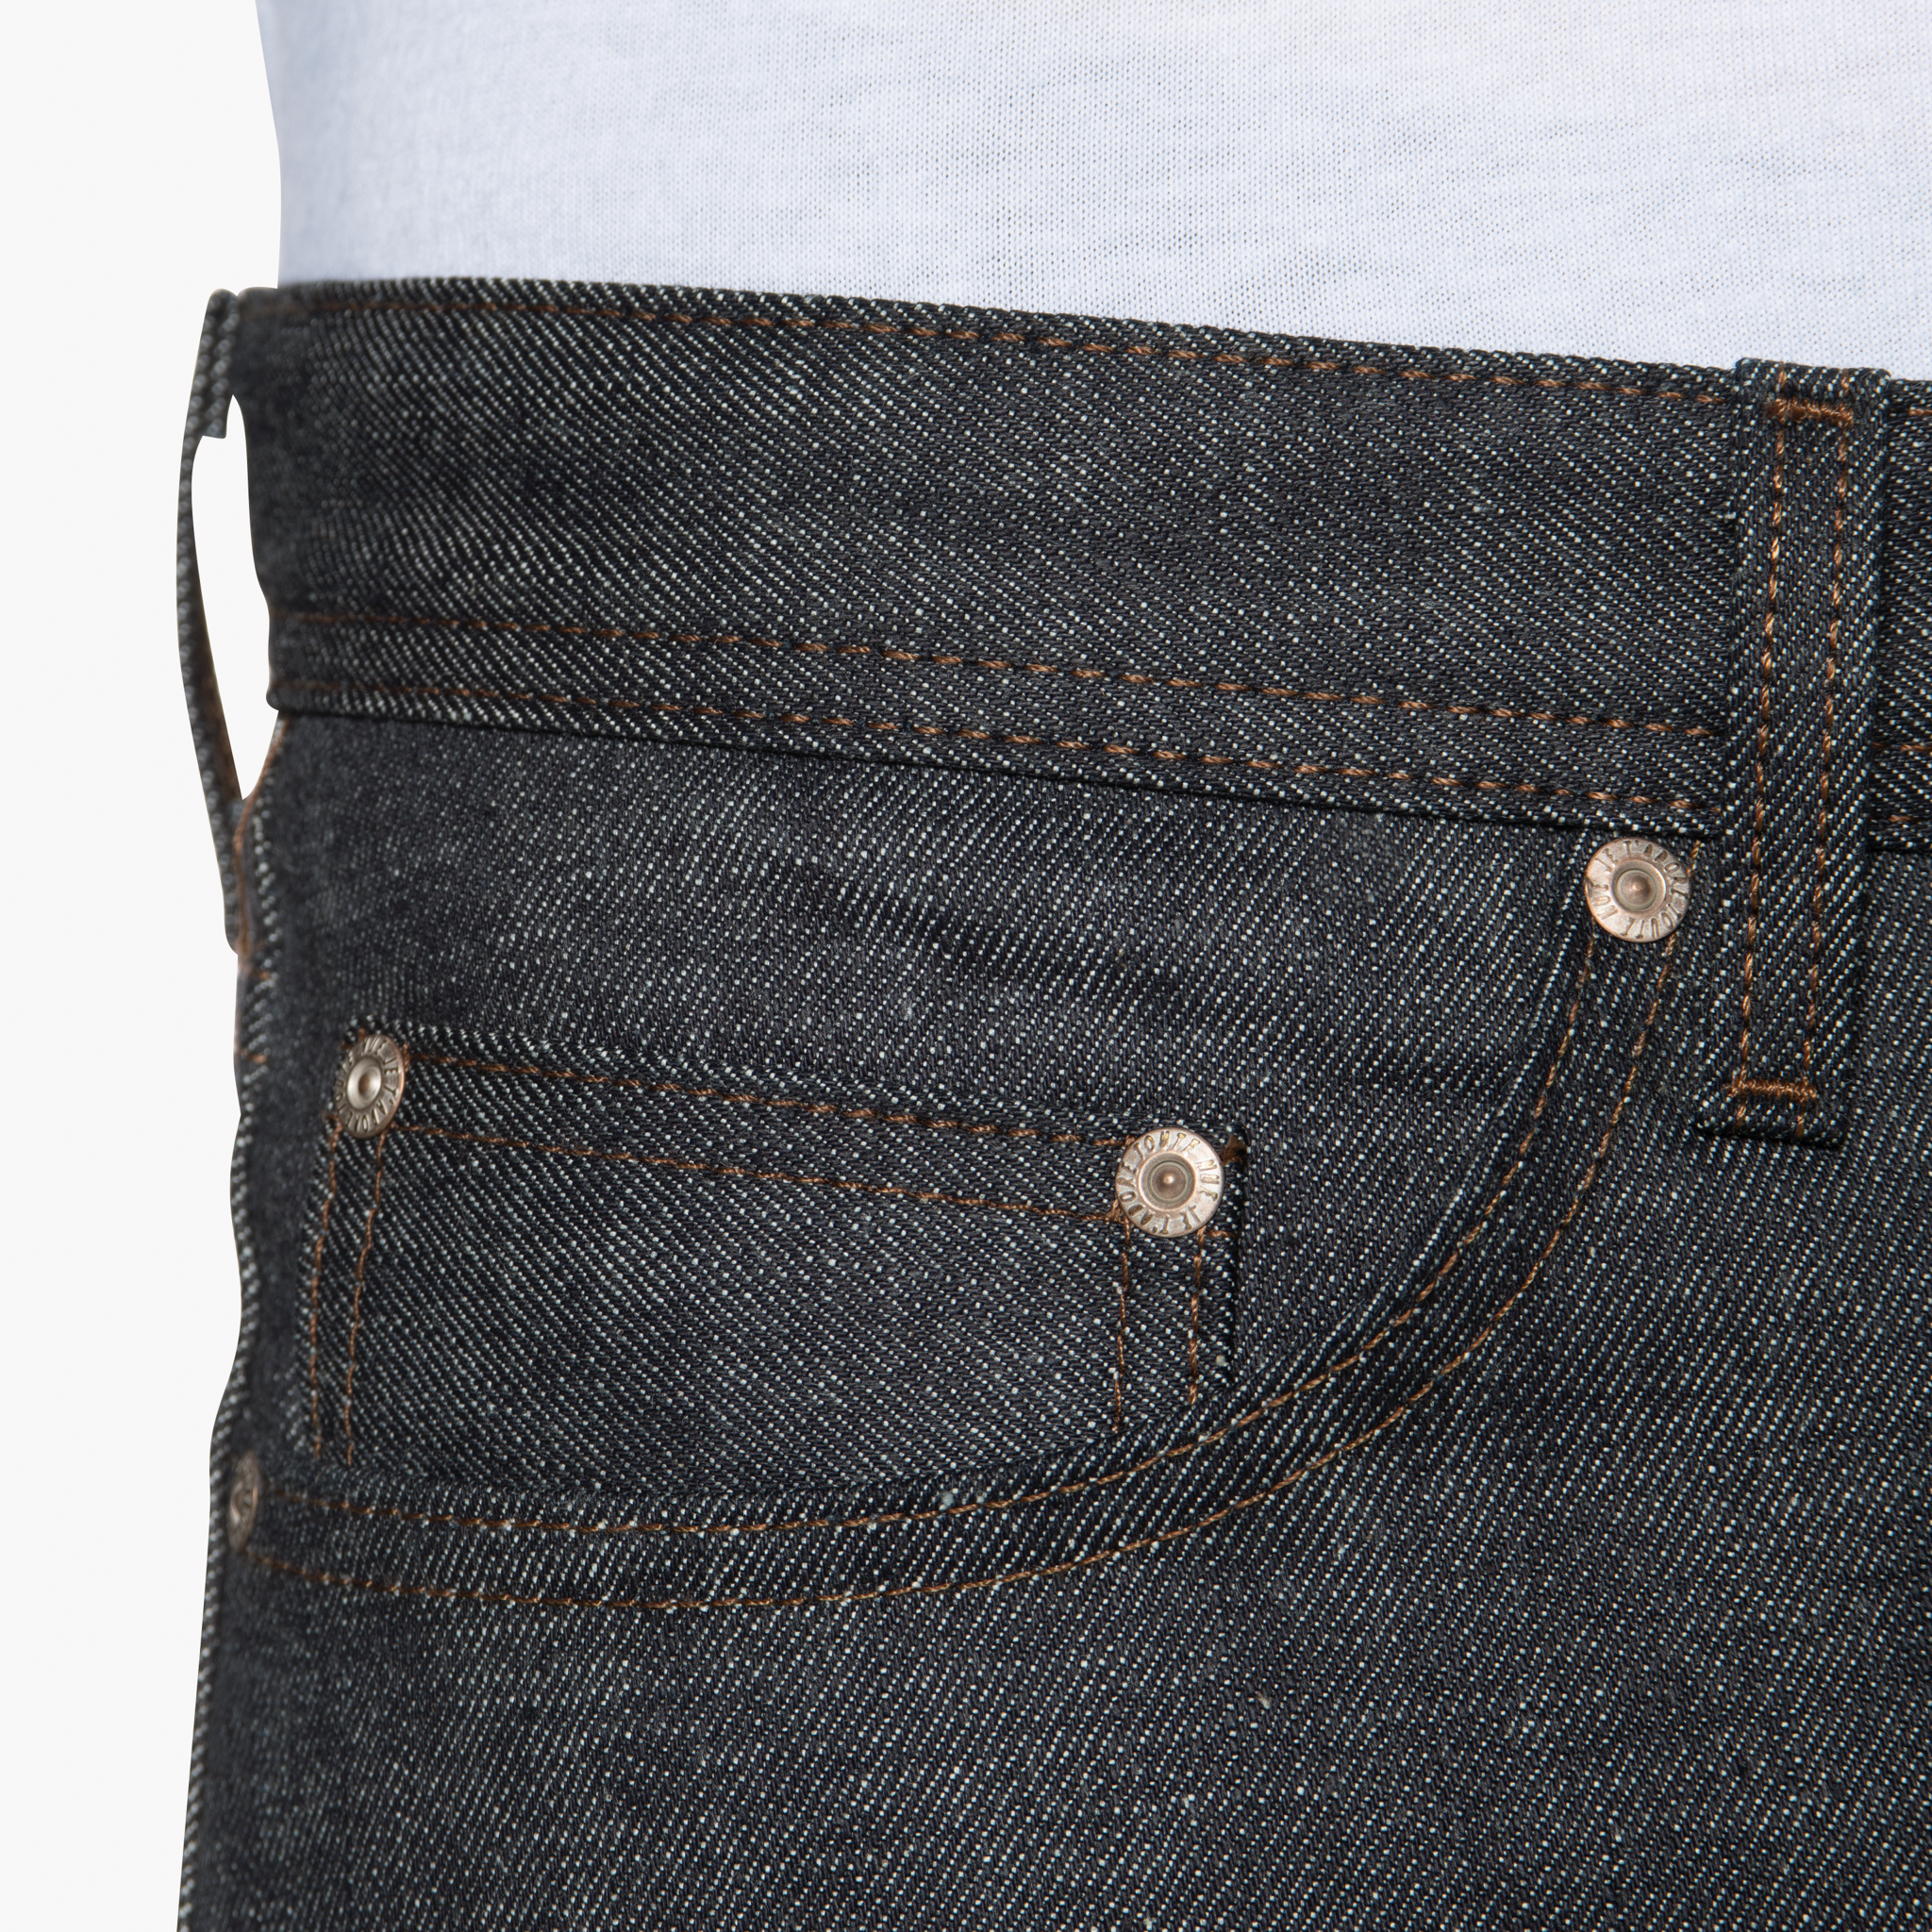  Scratch-n-Sniff - Hiba Cypress  jeans -coin pocket 